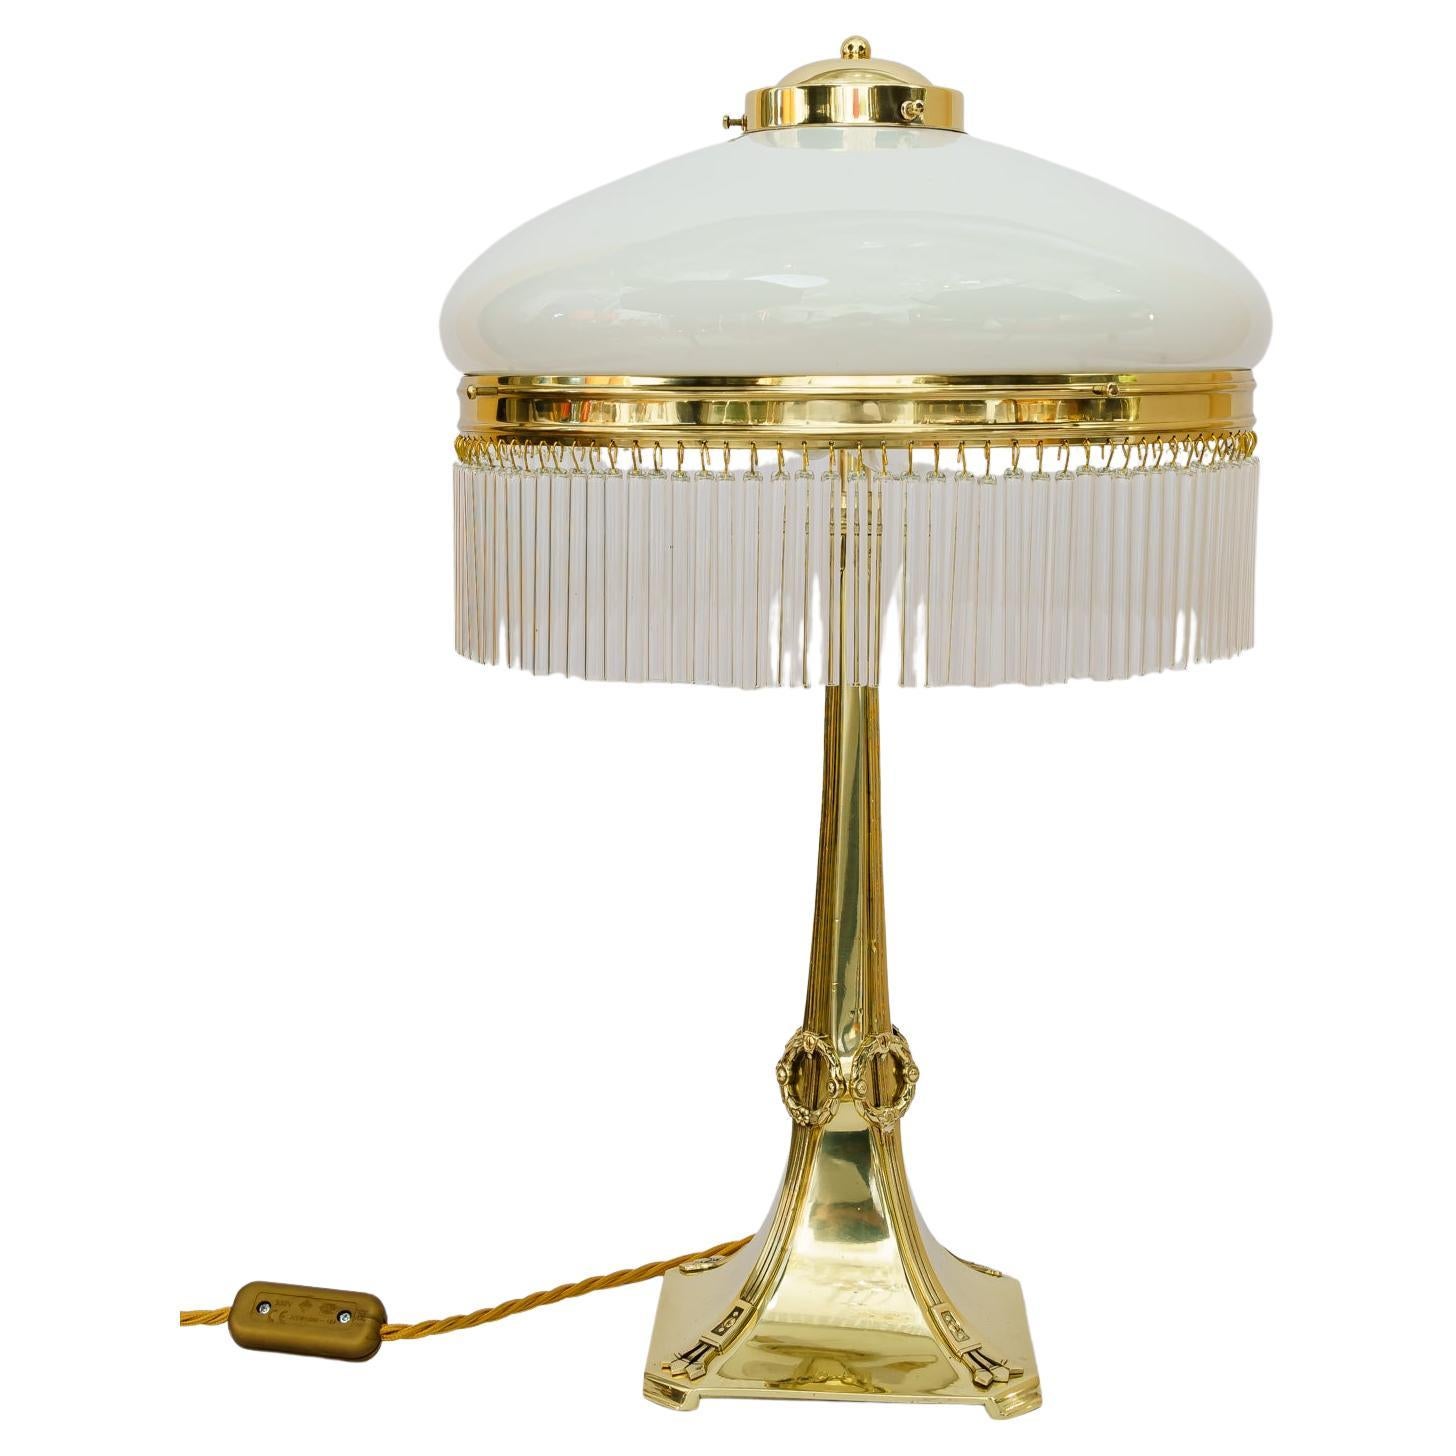 Jugenstil table lamp Vienna around 1910s.
Brass polished and stove enamelled.
Opal glass shade.
Glass sticks are replaced (new).